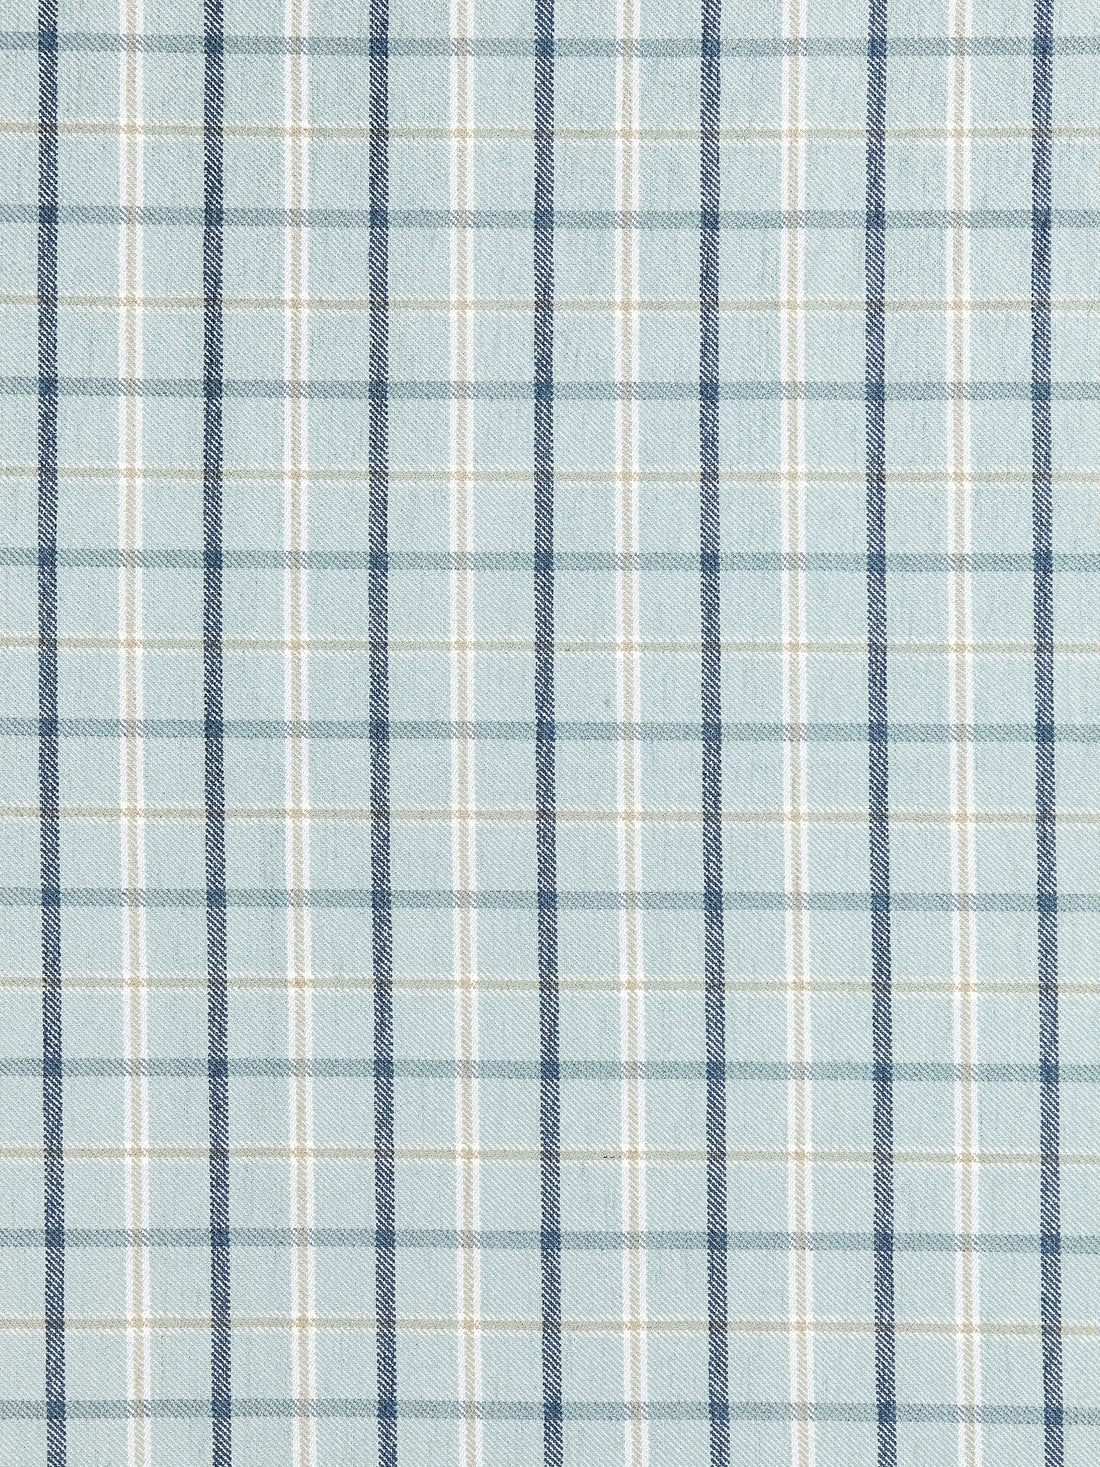 Bristol Plaid fabric in mineral color - pattern number SC 000227121 - by Scalamandre in the Scalamandre Fabrics Book 1 collection